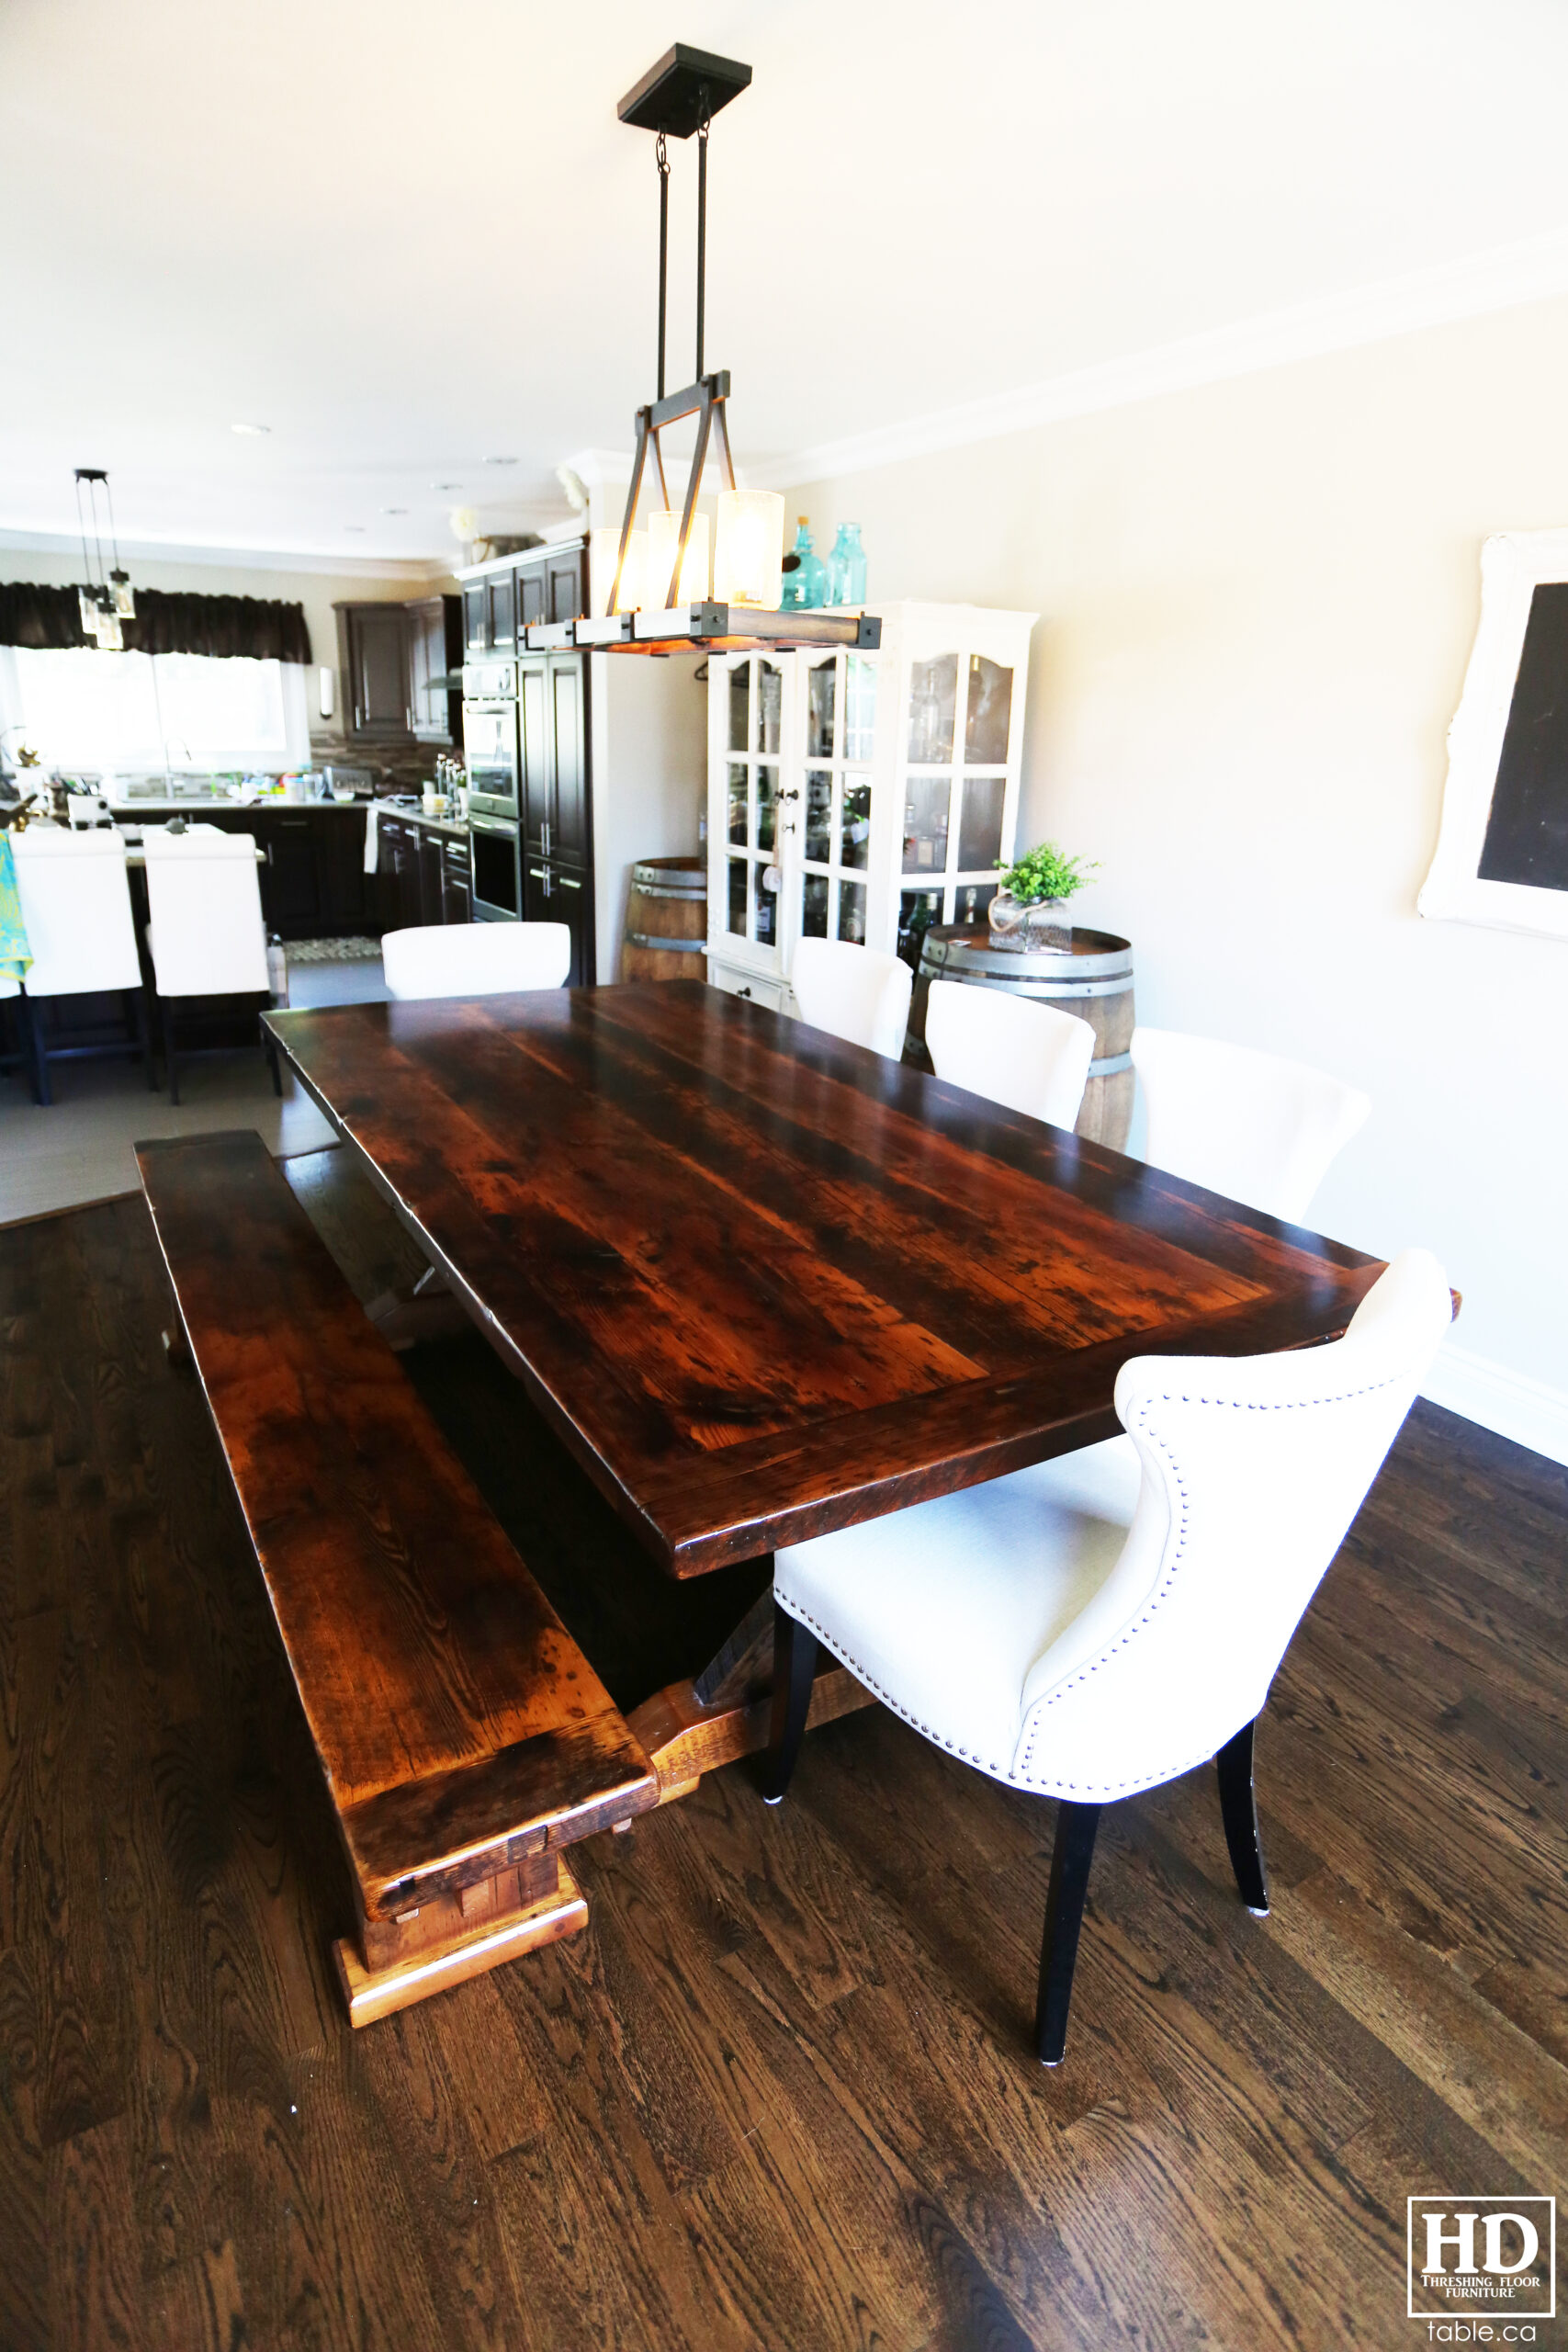 Unique Wood Table by HD Threshing Floor Furniture / www.table.ca